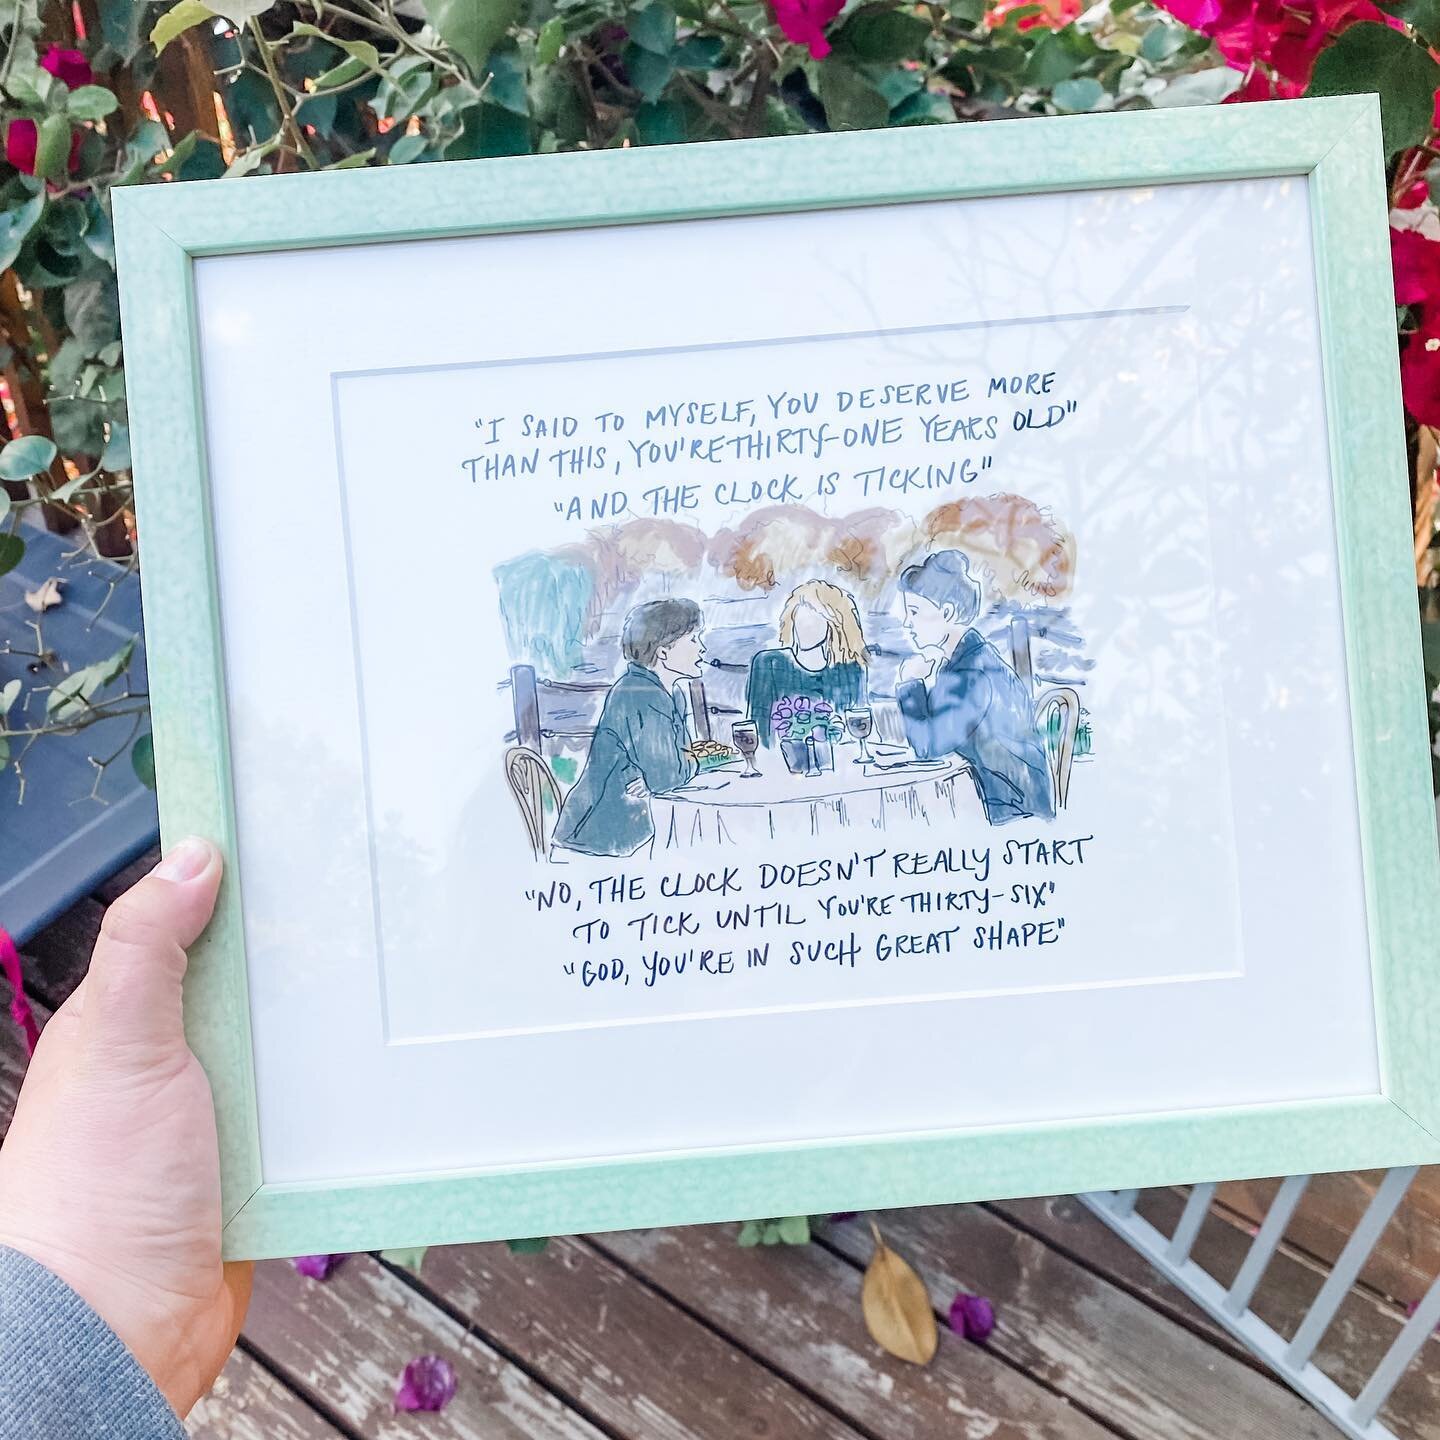 This surprise gift from @elliedawndesigns arrived in the mail today. She did @framebridge on one of her When Harry Met Sally prints for me (one of my favorite lines) 😭 if you haven&rsquo;t bought a Nancy Meyers/Nora Ephron movie print from her, have